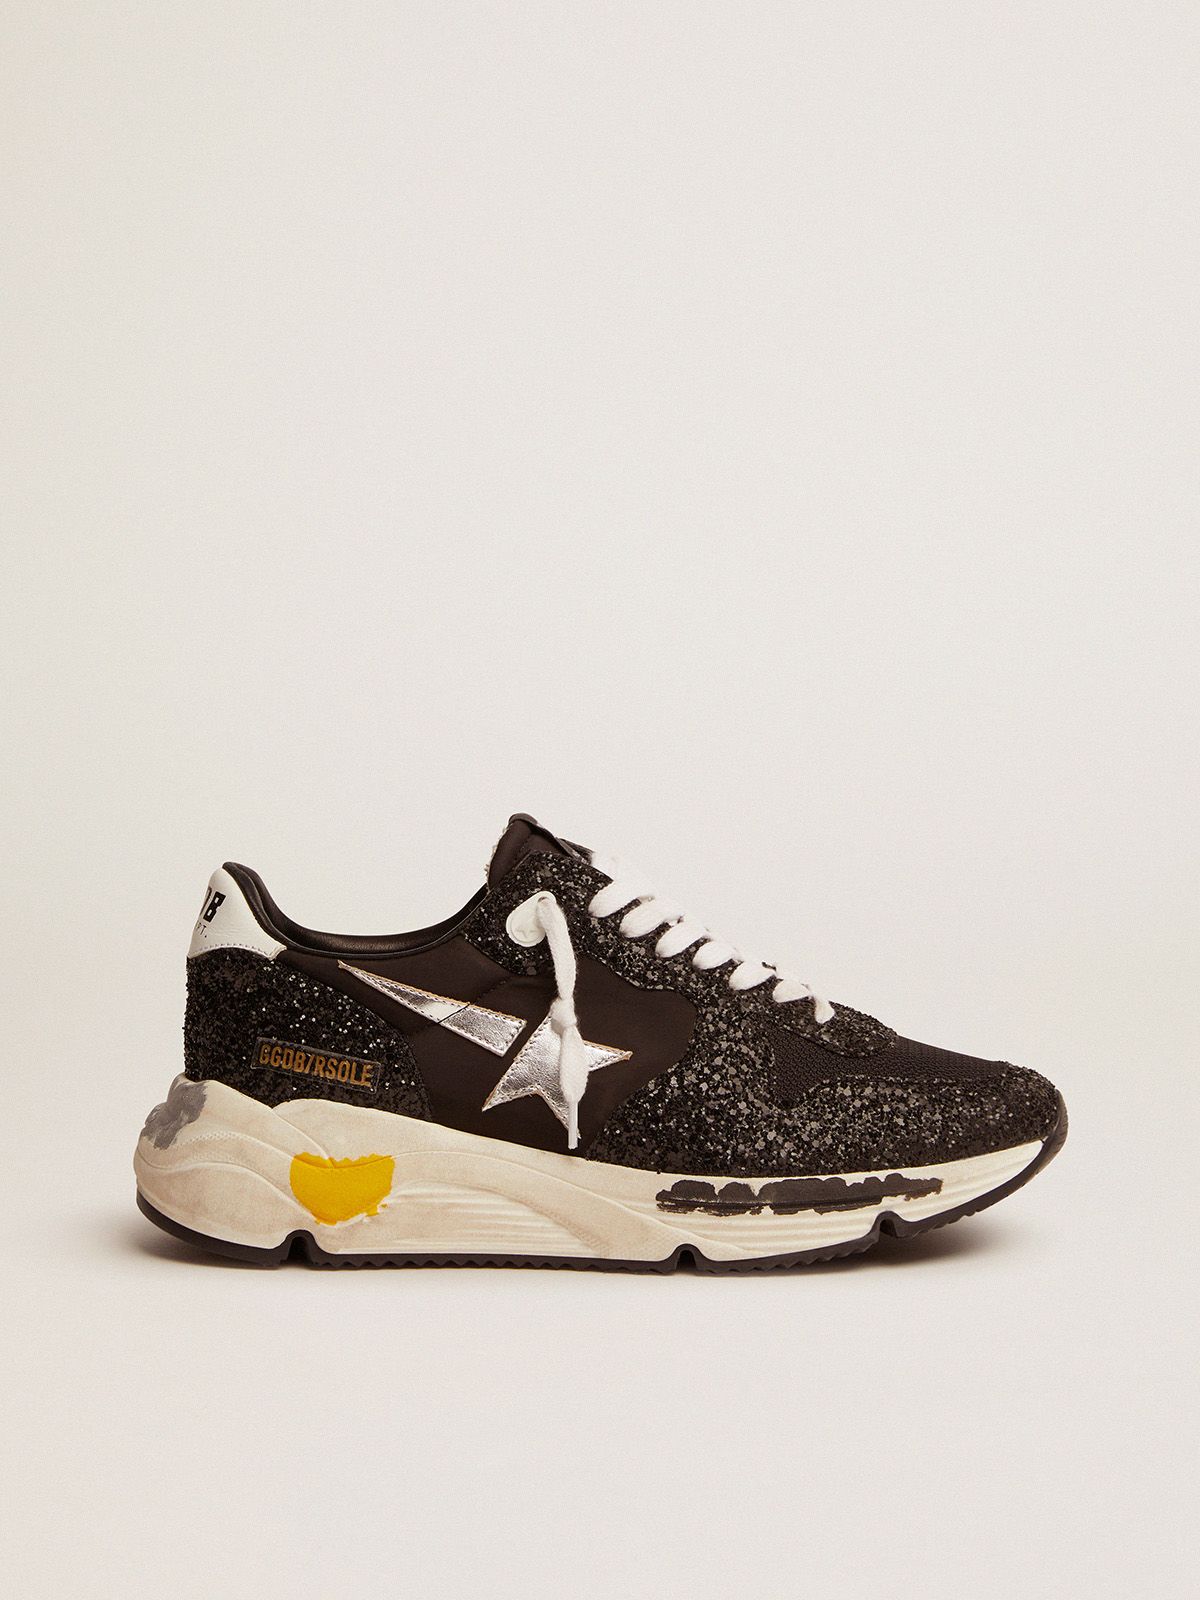 golden goose star nylon in leather sneakers black laminated glitter Sole silver and with Running